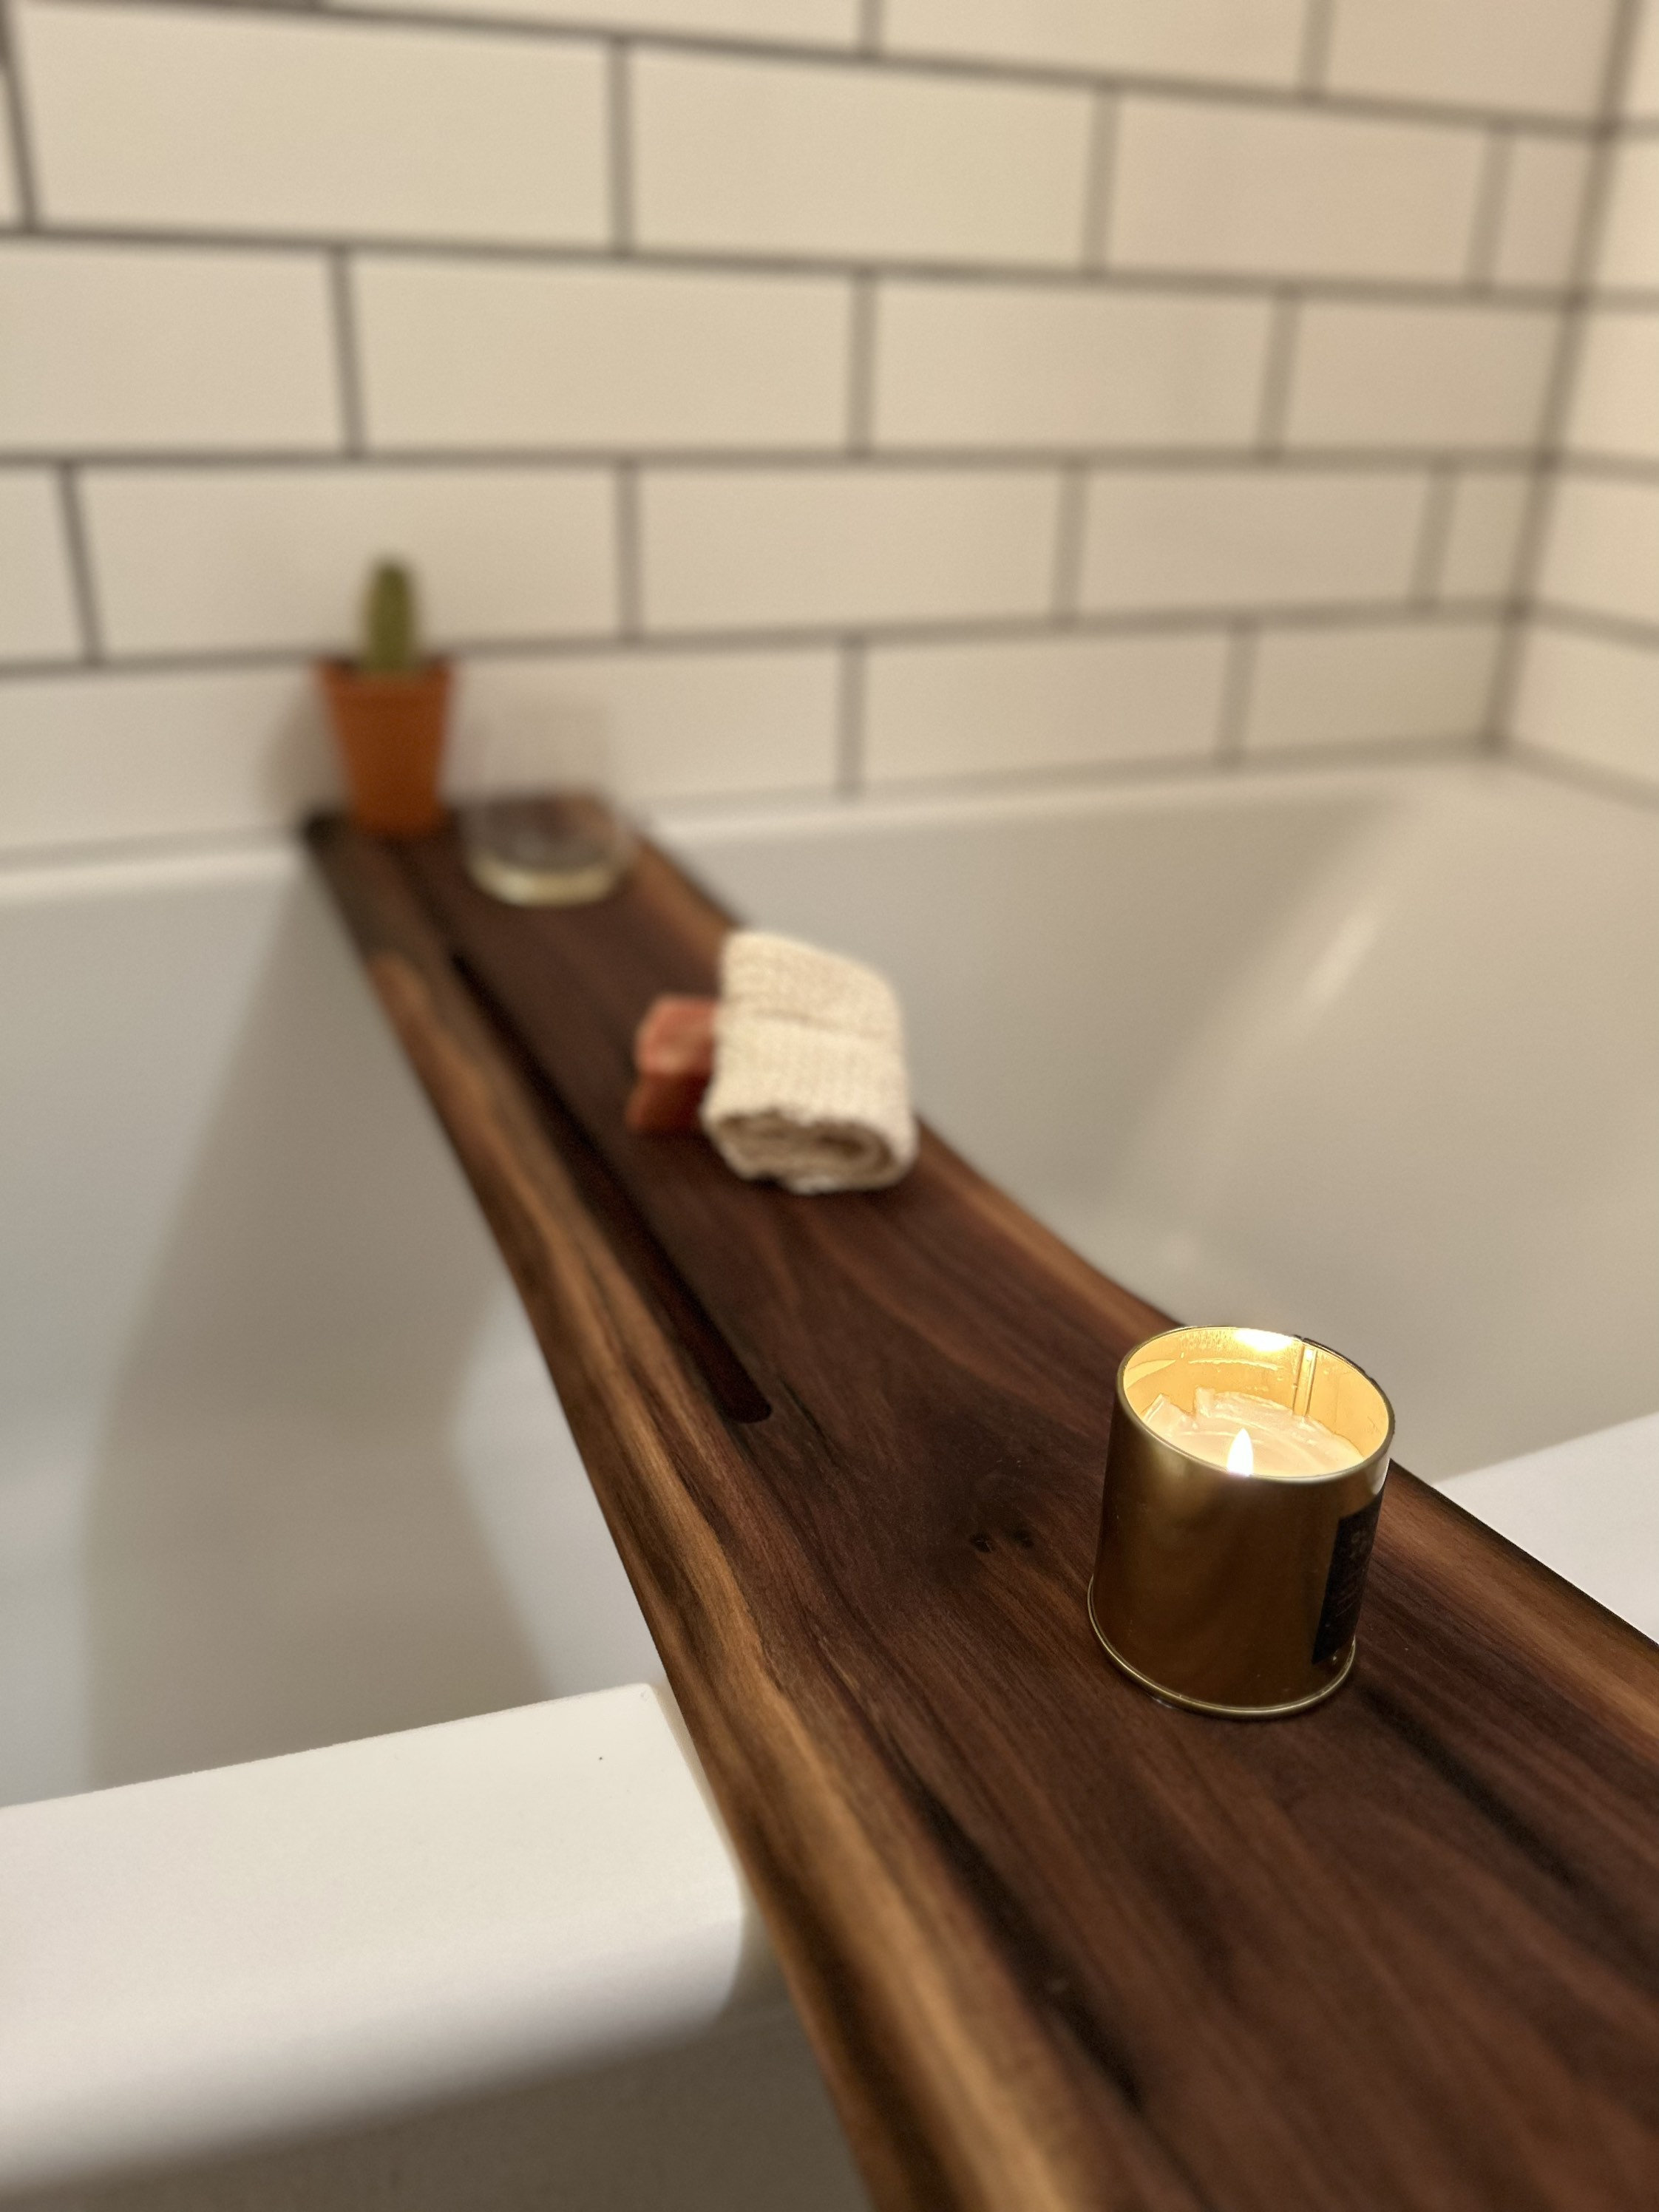 Live Edge Bath Caddy – Crafted of Light and Lumber